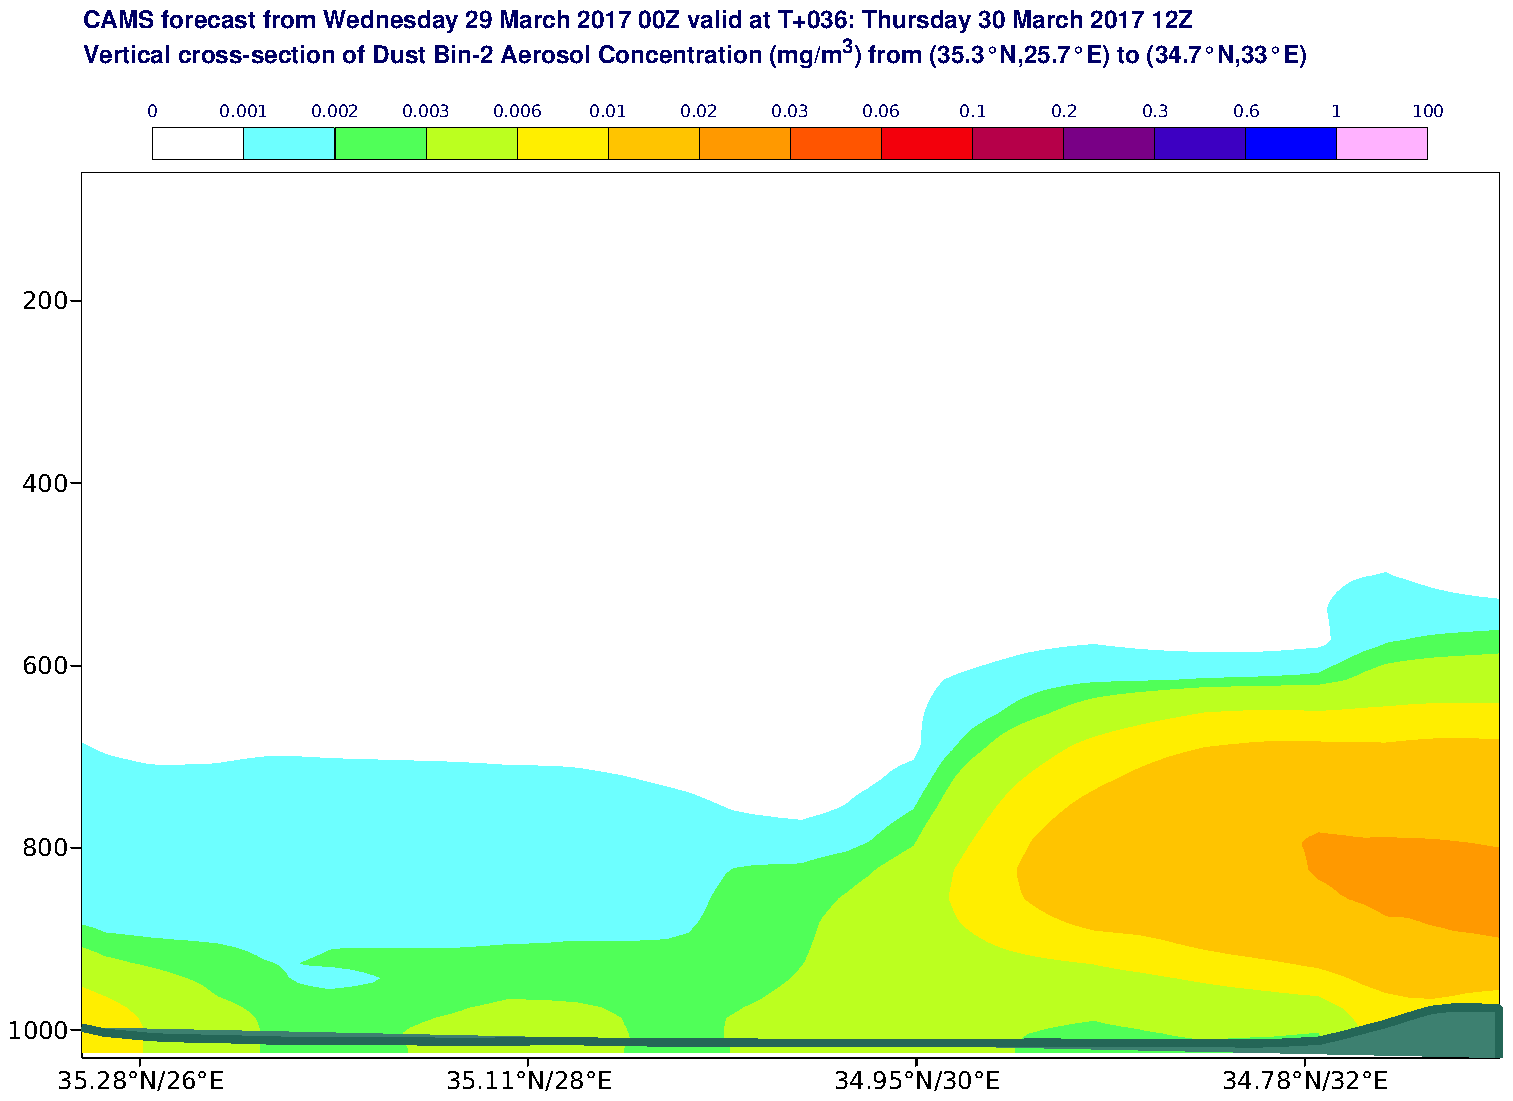 Vertical cross-section of Dust Bin-2 Aerosol Concentration (mg/m3) valid at T36 - 2017-03-30 12:00